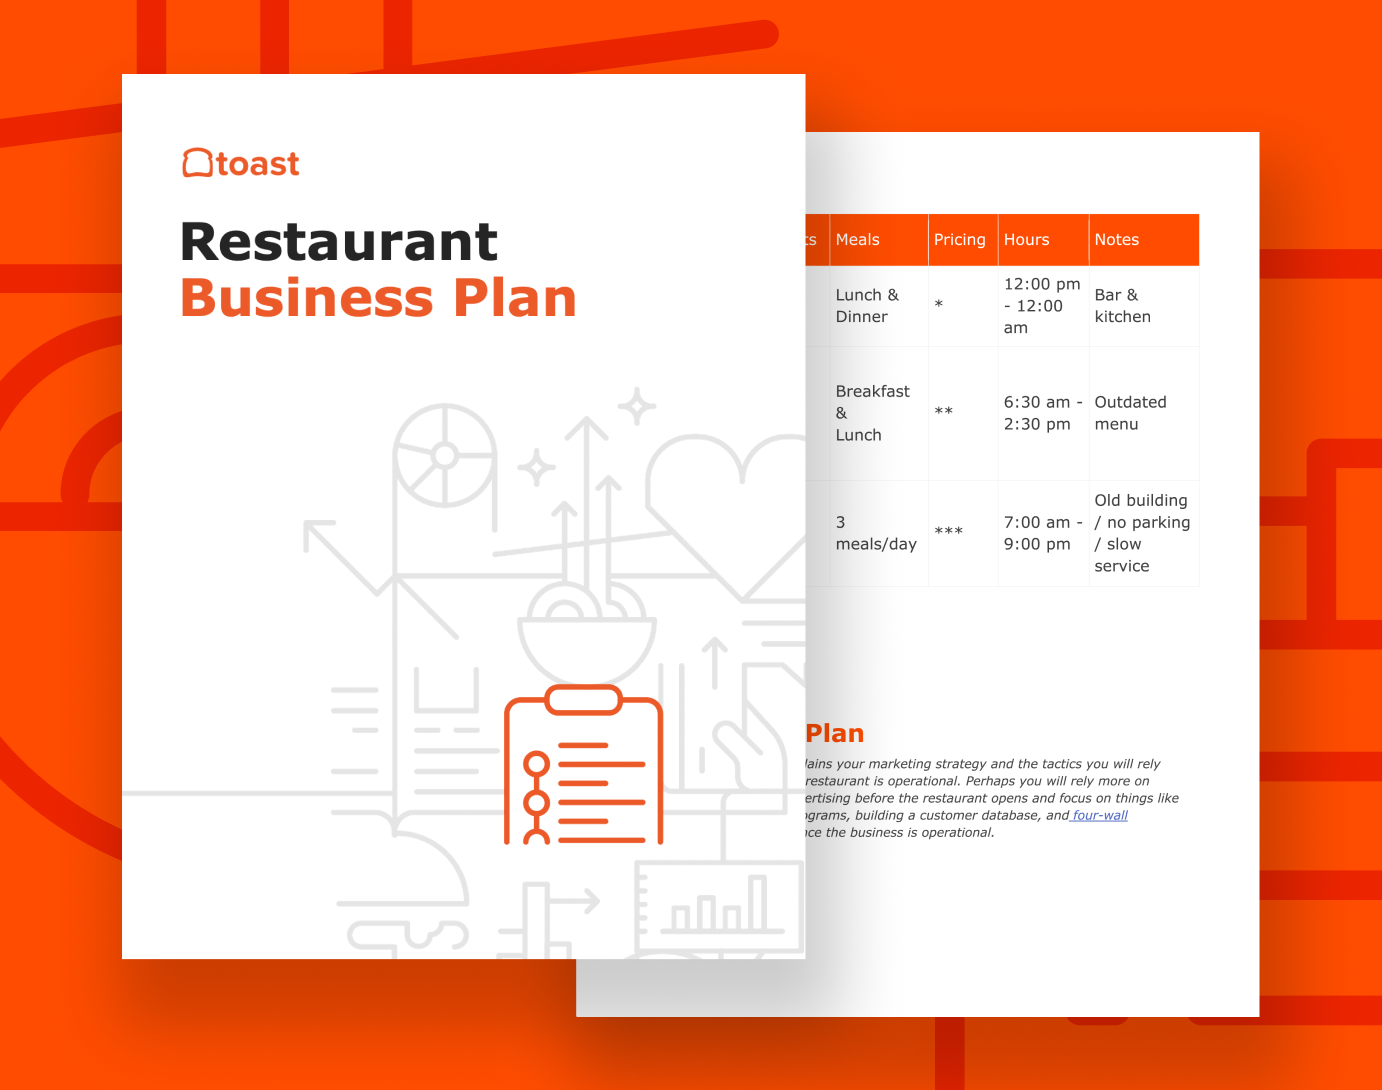 Set your new restaurant up for success | Toast POS